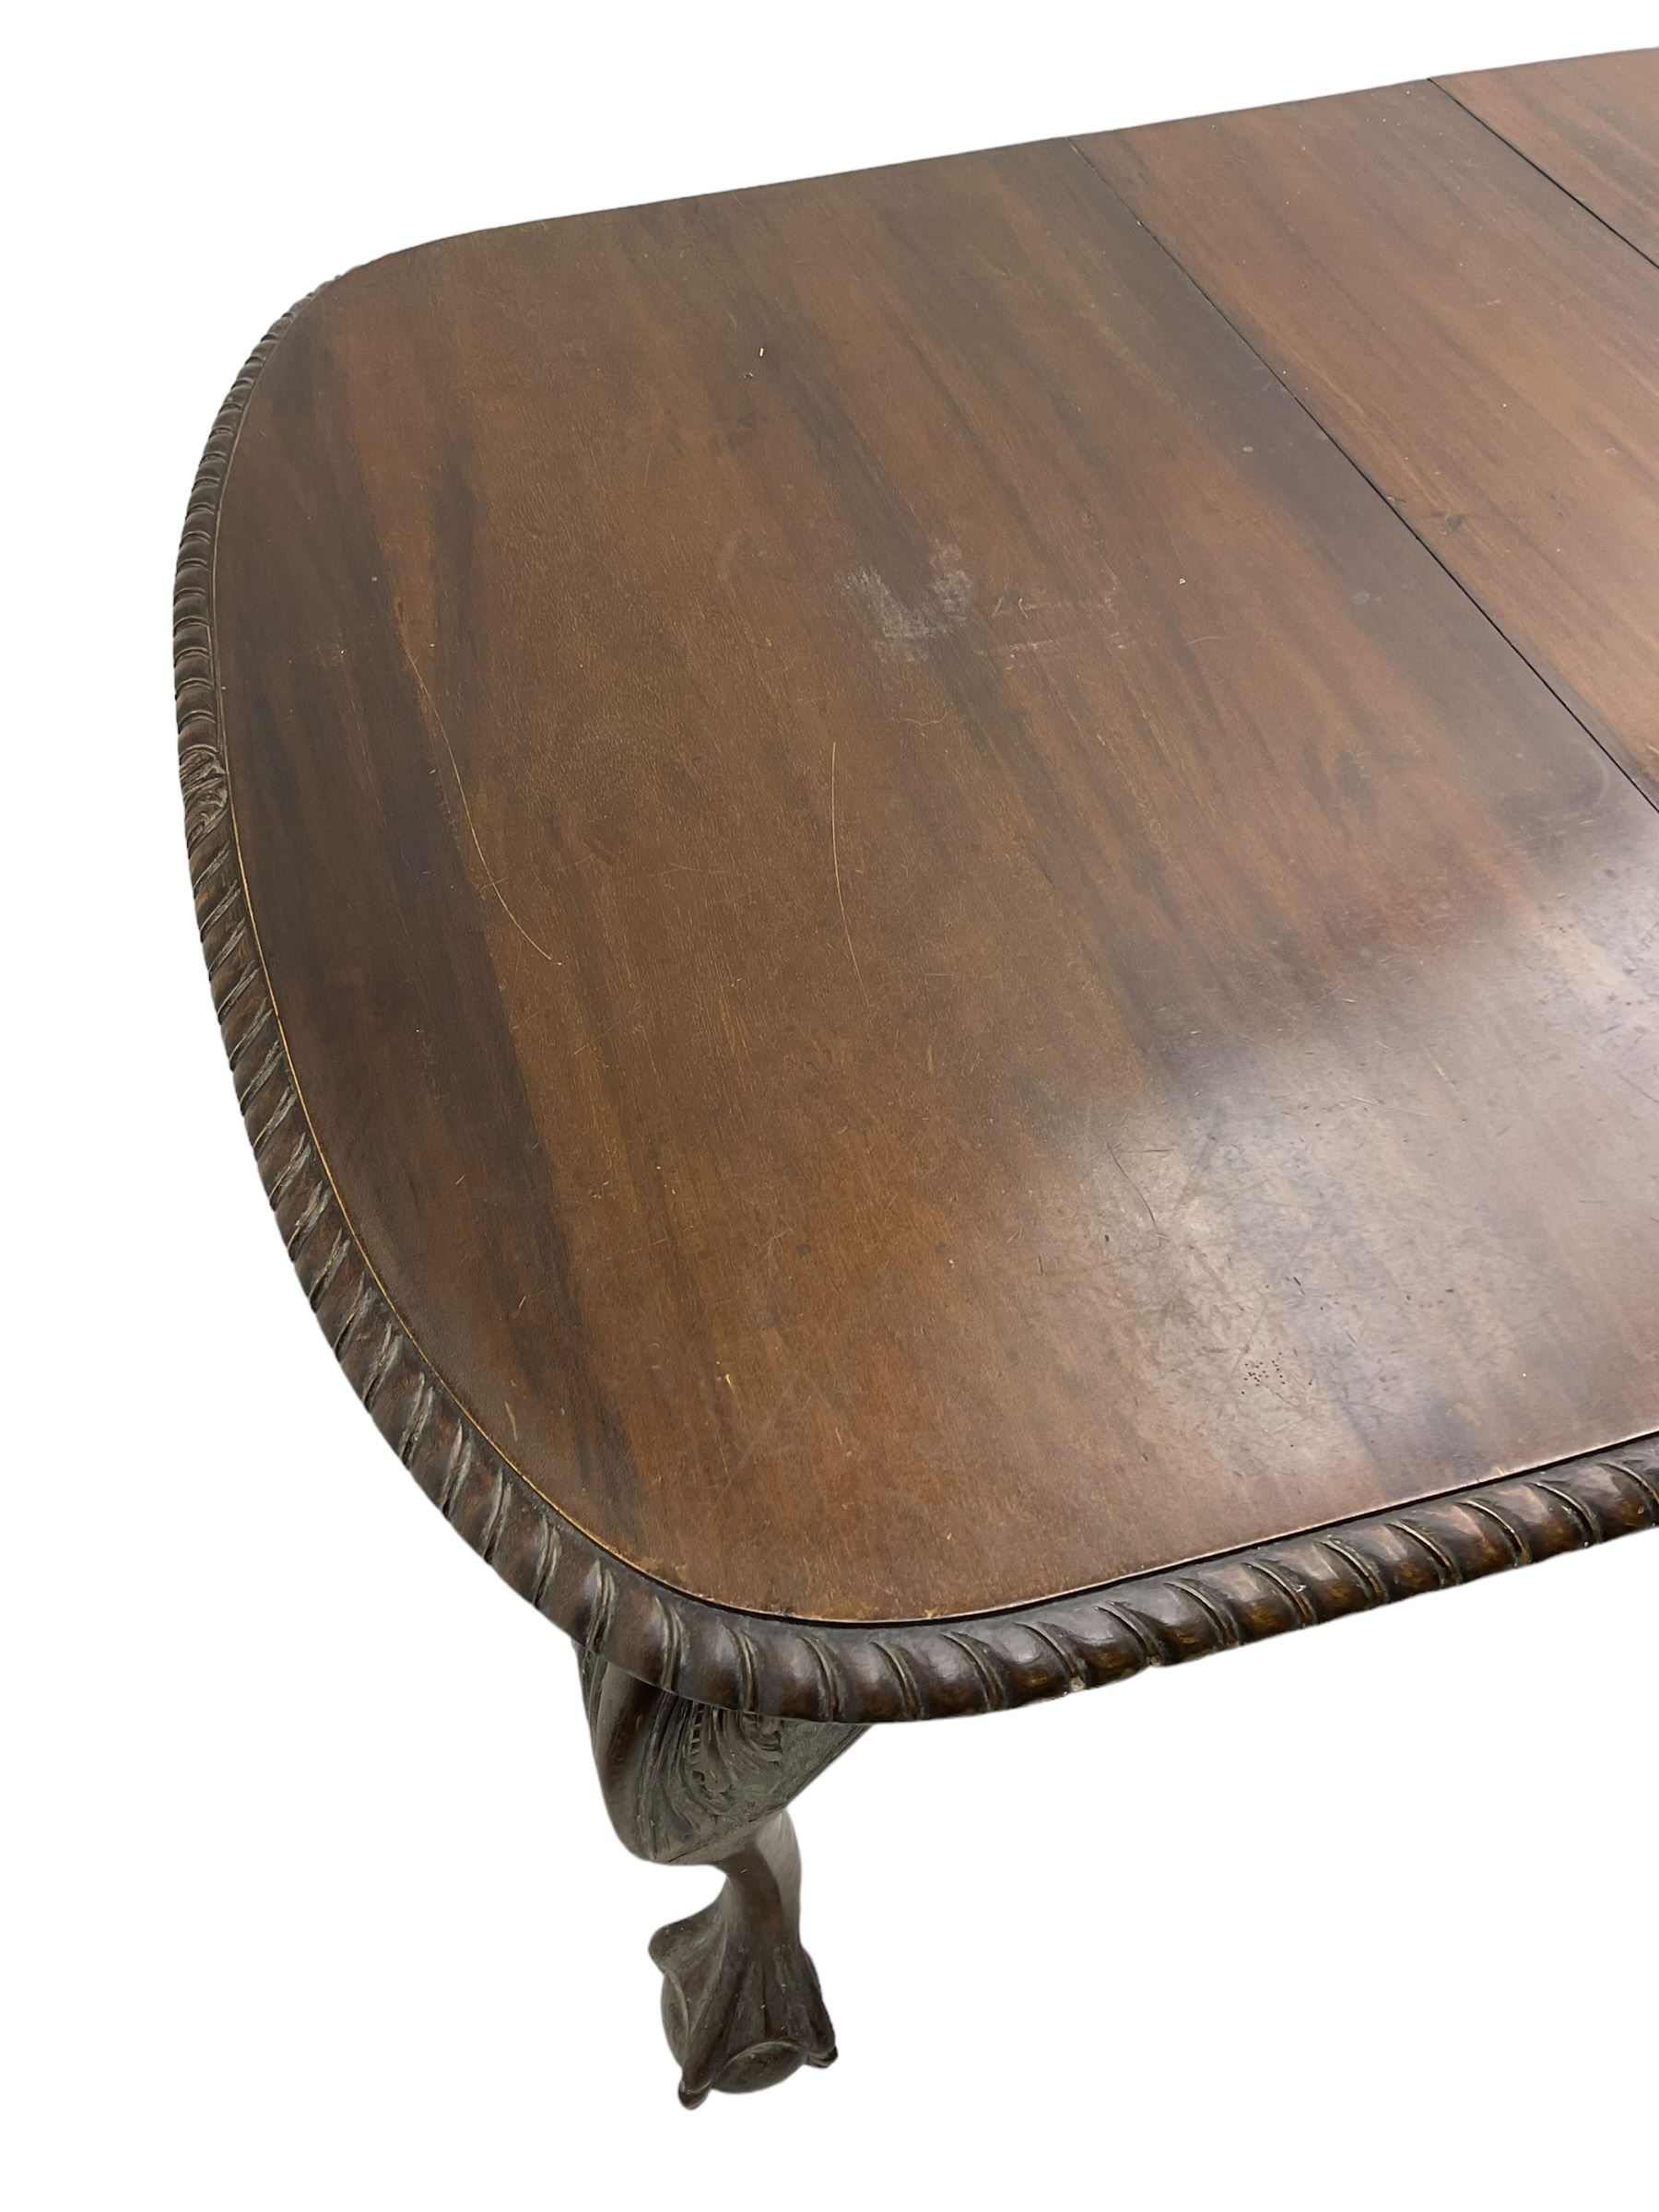 Early 20th century Georgian design mahogany extending dining table - Image 4 of 8